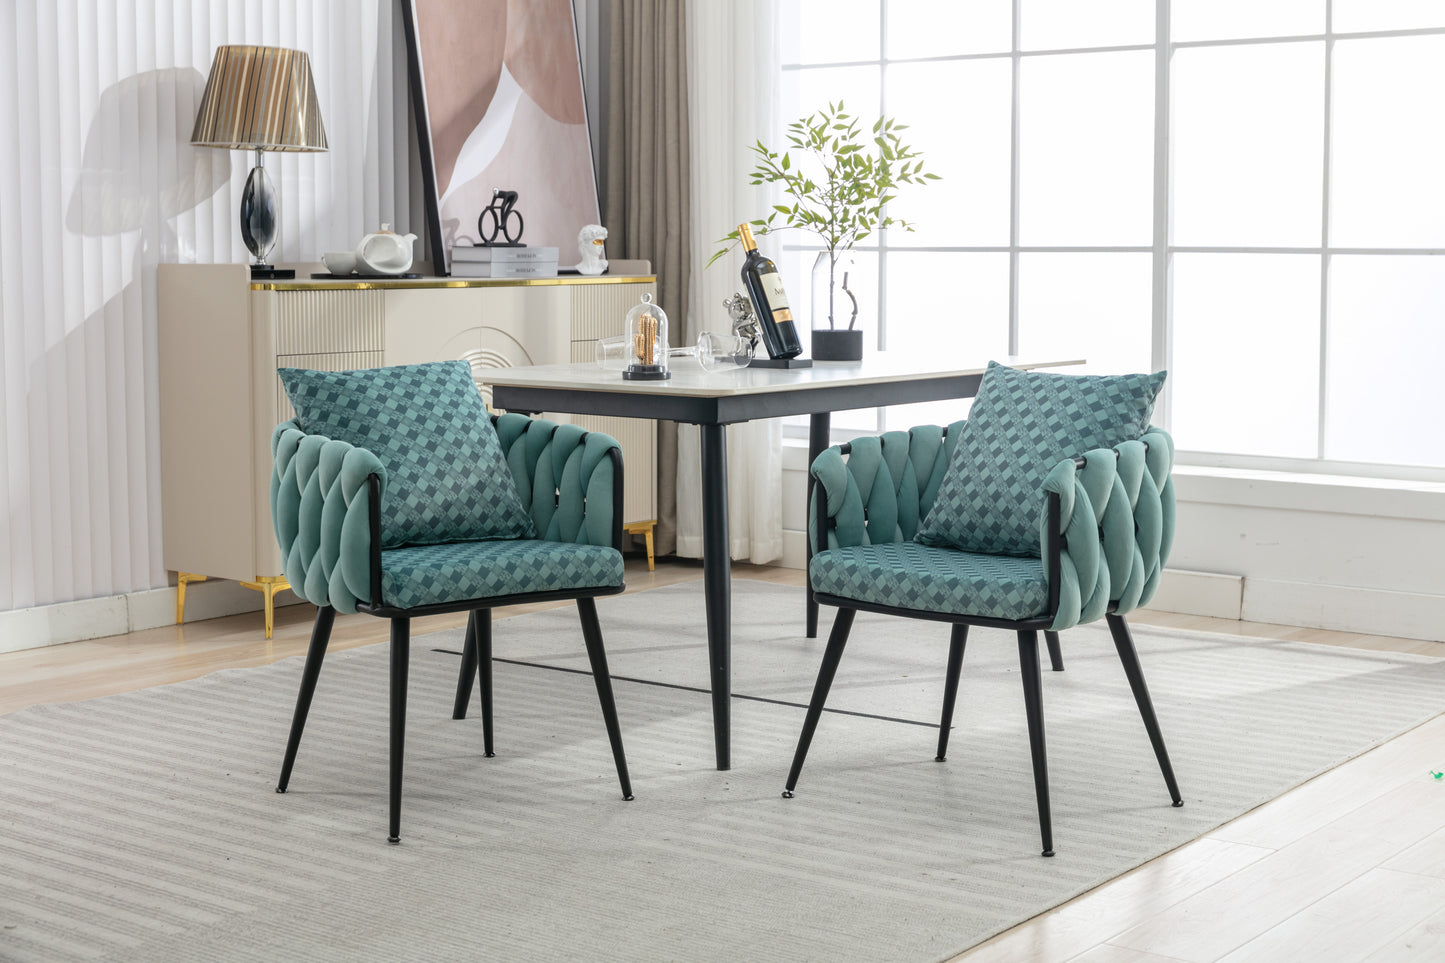 Teal Handwoven Accent Chairs: Set of 2